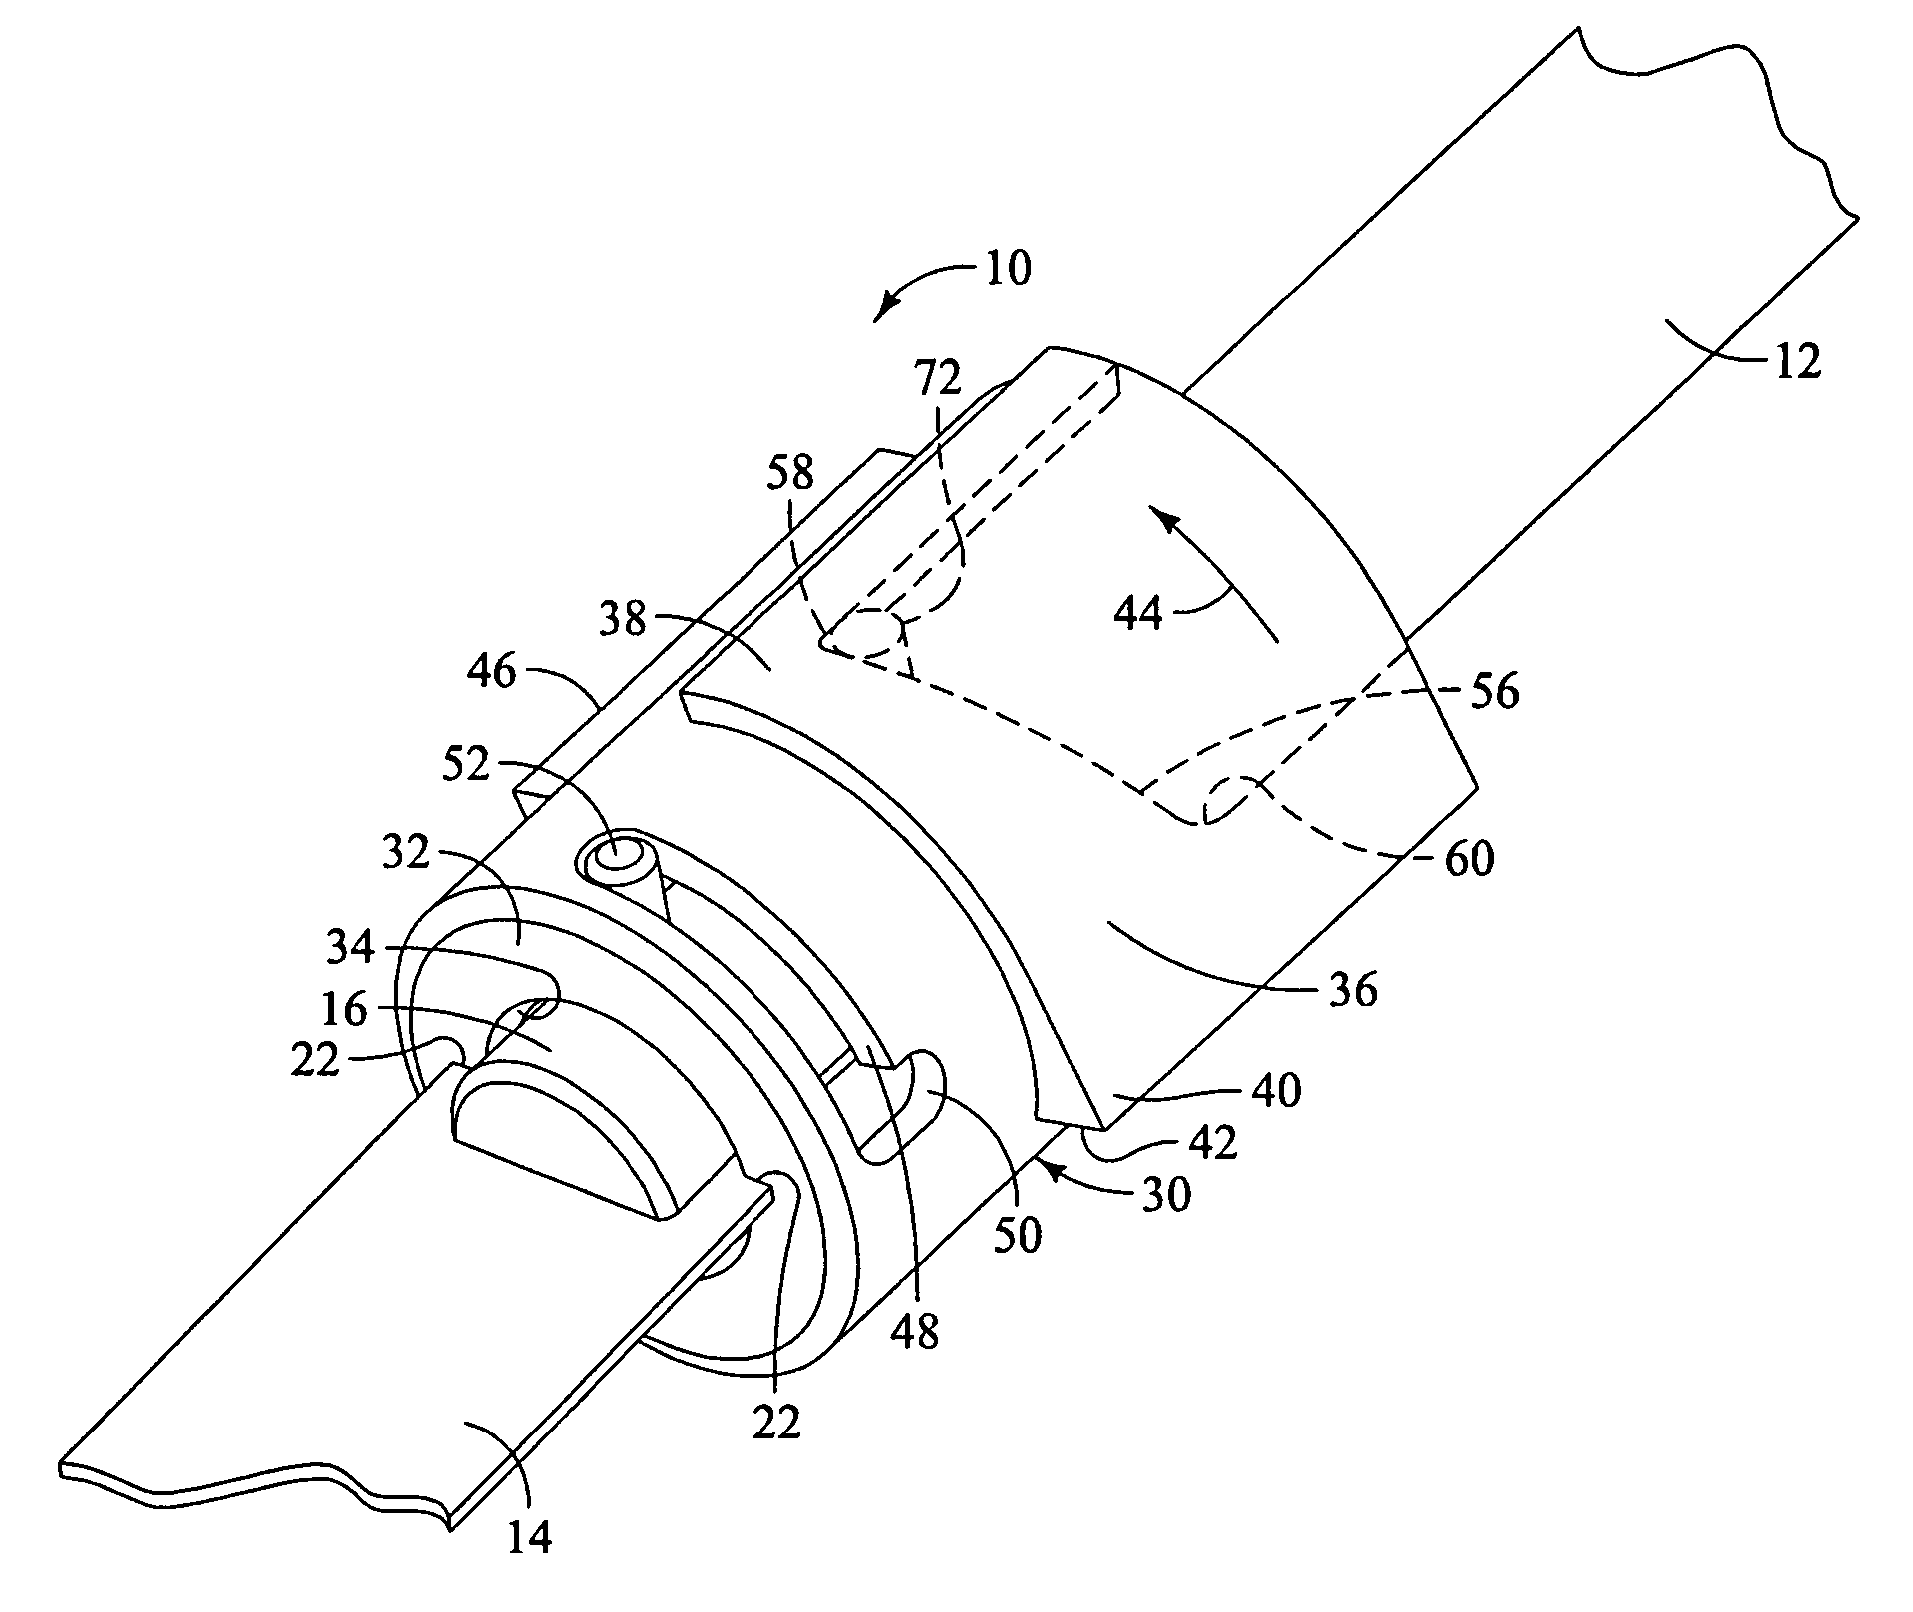 Tool-less blade clamping apparatus for a reciprocating tool